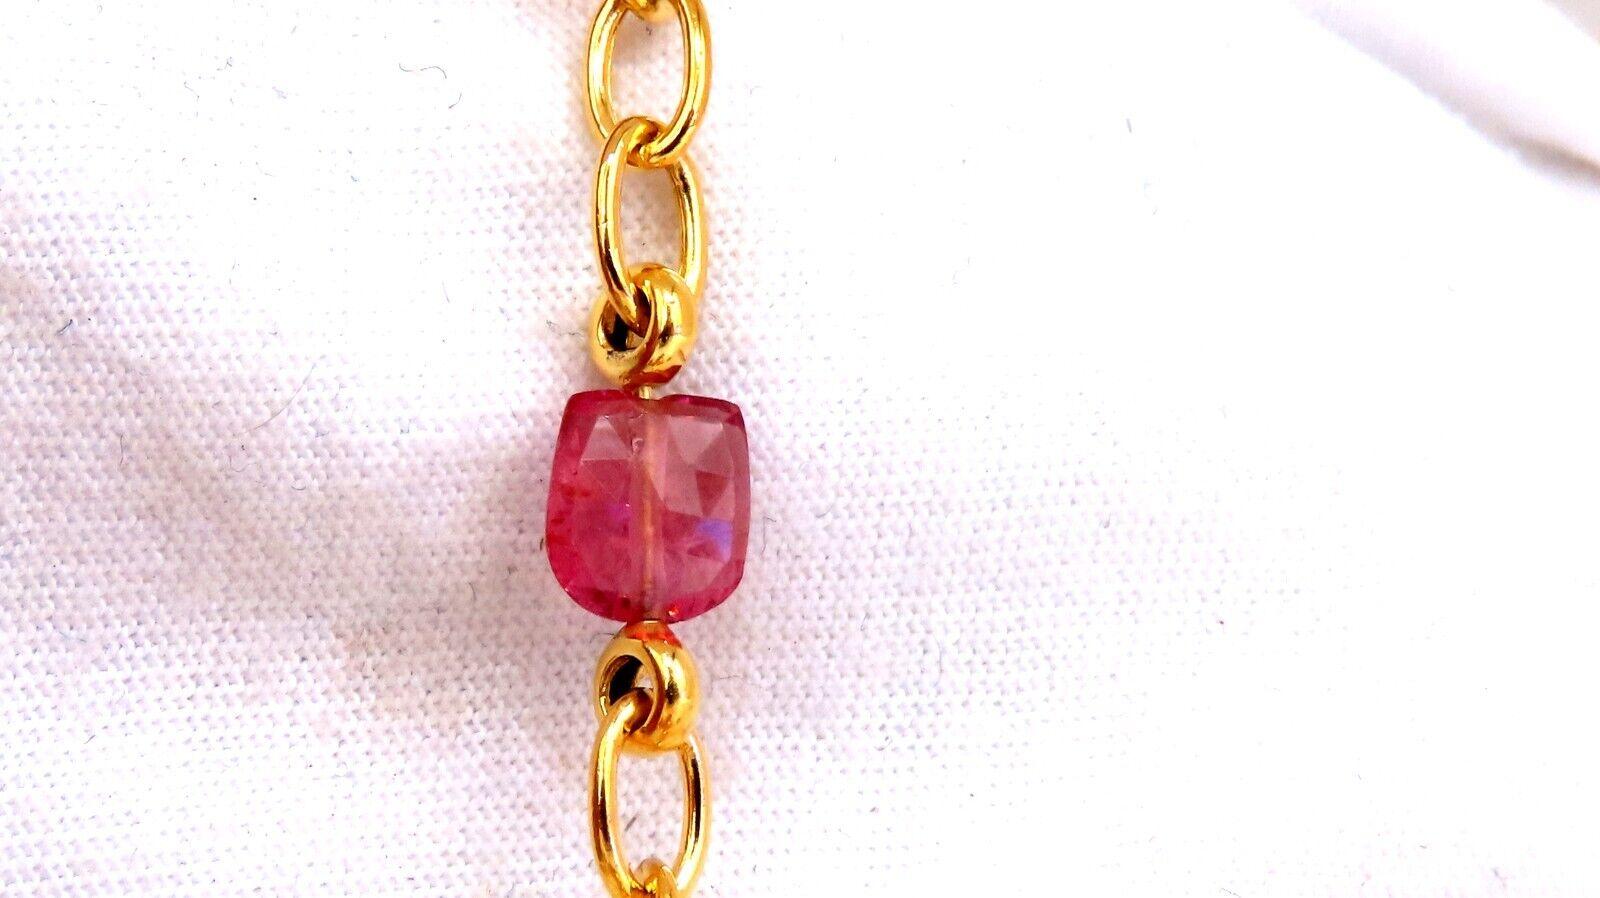 Watermelon color Tourmaline Necklace



10ct. Natural Tourmaline Necklace.

Cabochon cut Brilliant

7 x 6mm 

Clean Clarity & Transparent

Prime Bright Purple Pink color.



14kt yellow gold 

12.3 grams.

Dangle Area: 2.5 inch Length.

Total